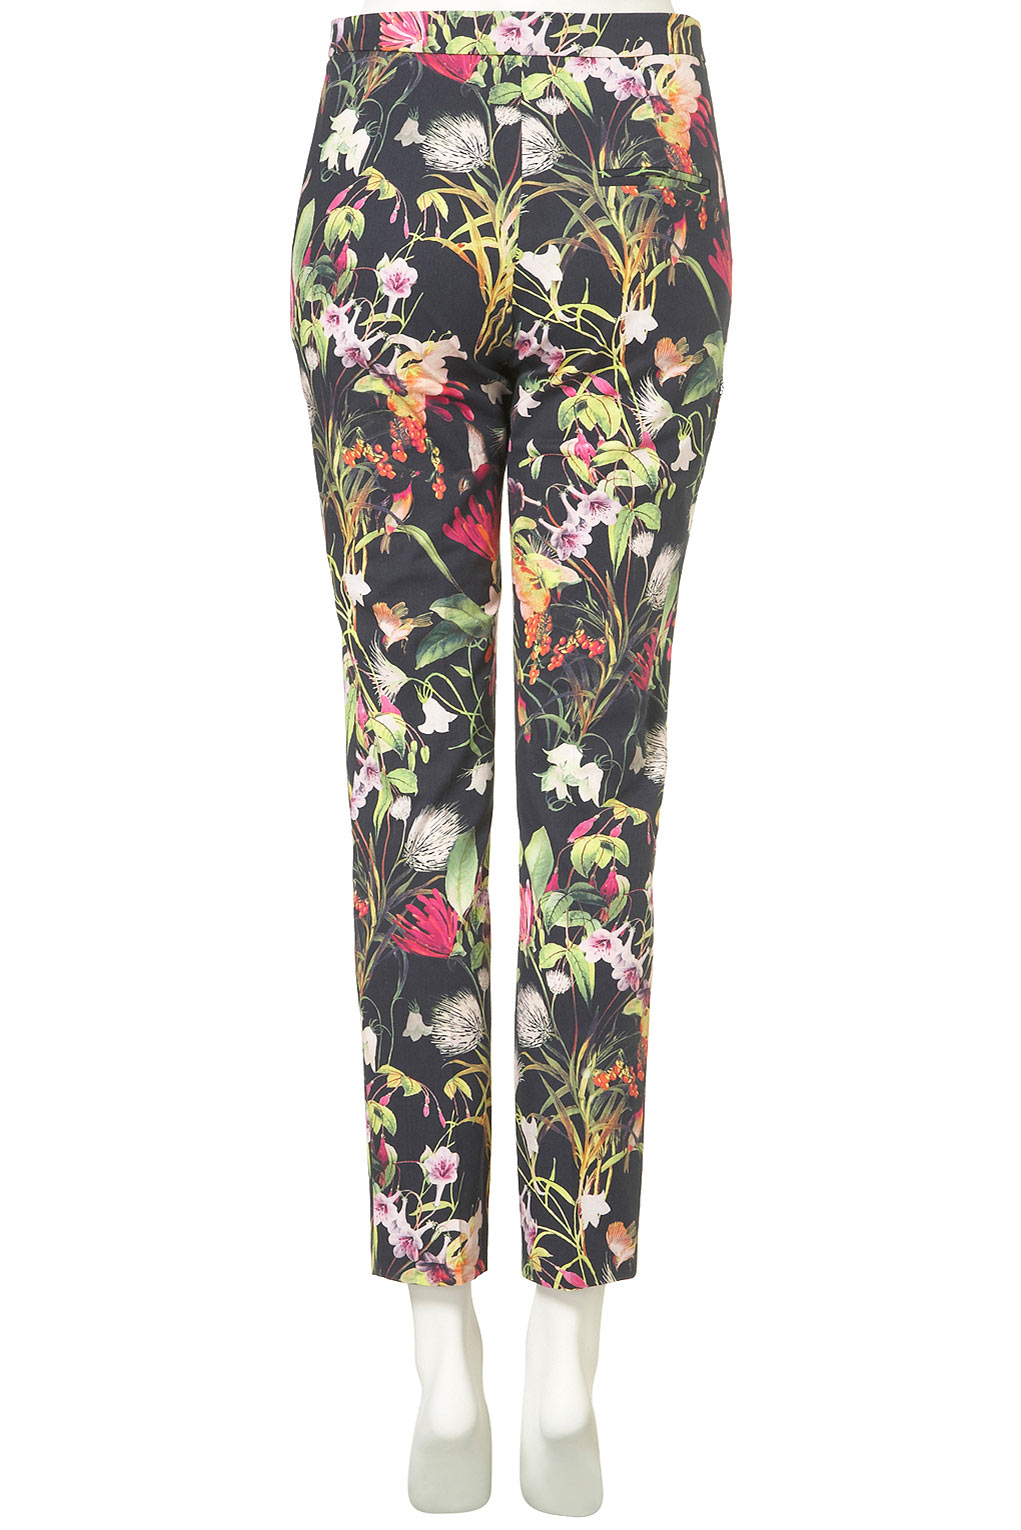 Lyst - Topshop Co-ord Tropical Slim Trousers in Blue